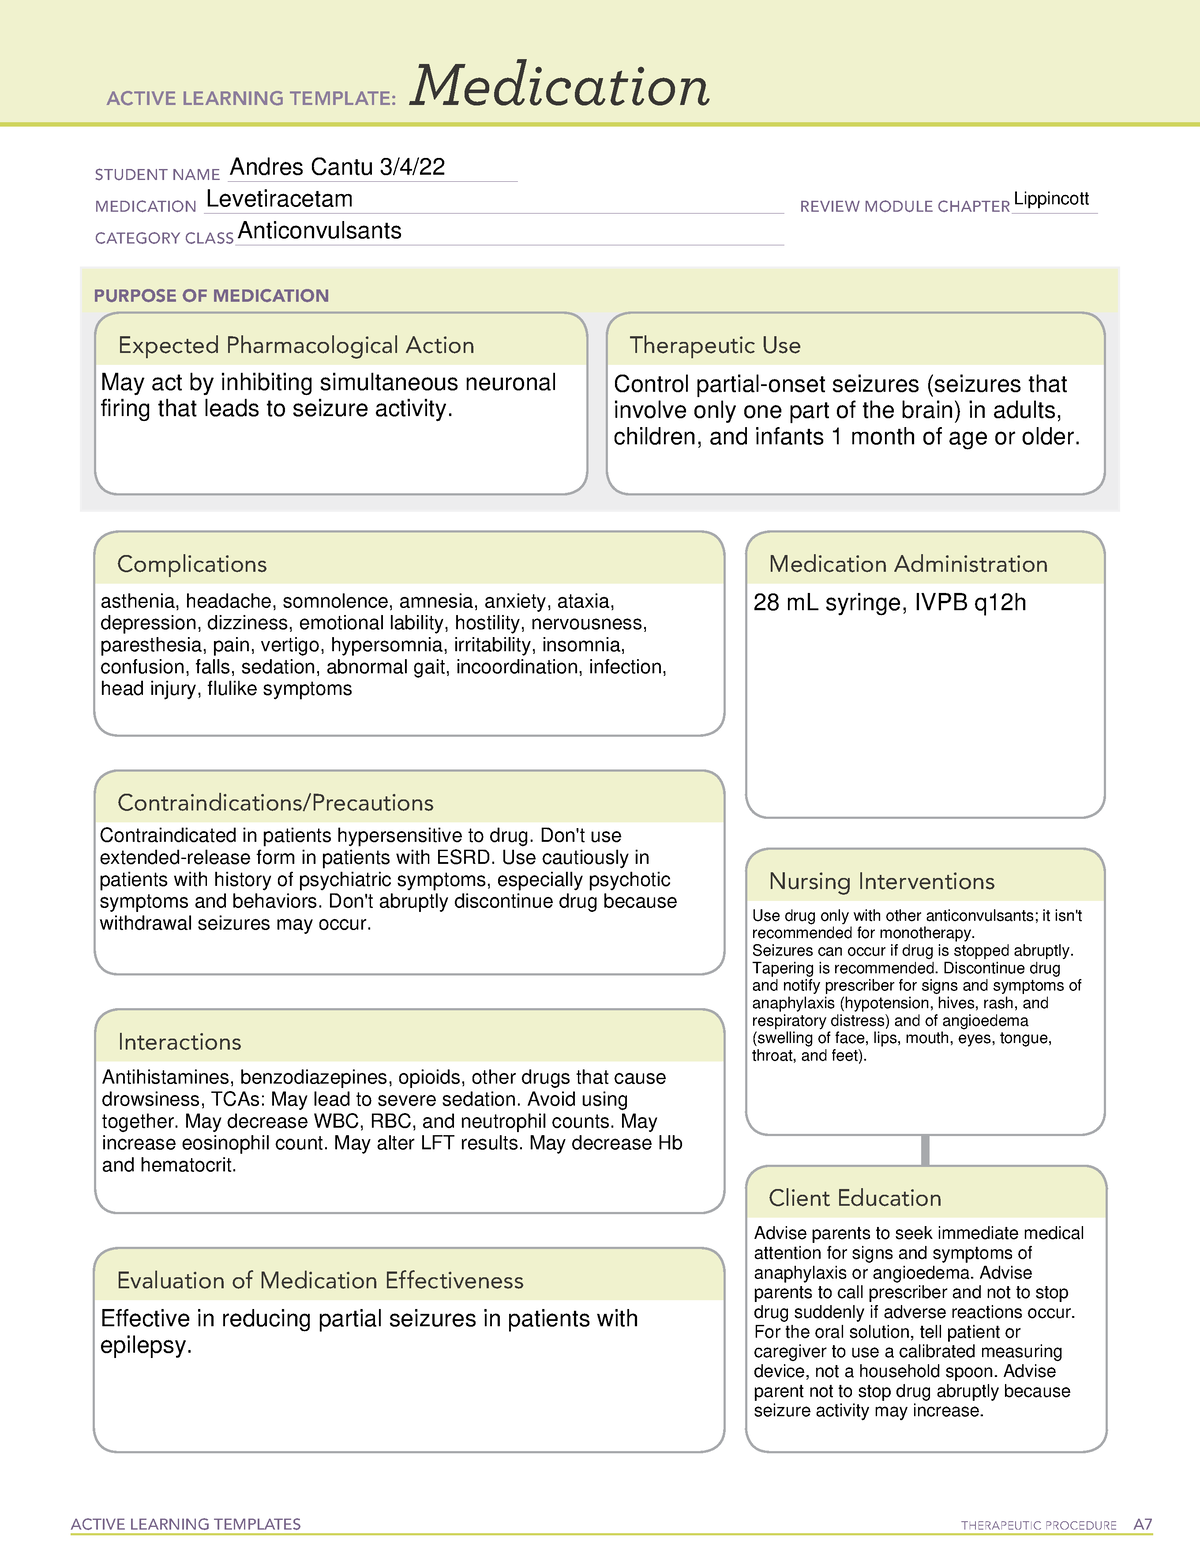 ATI Med Form, Levetiracetam information ACTIVE LEARNING TEMPLATE